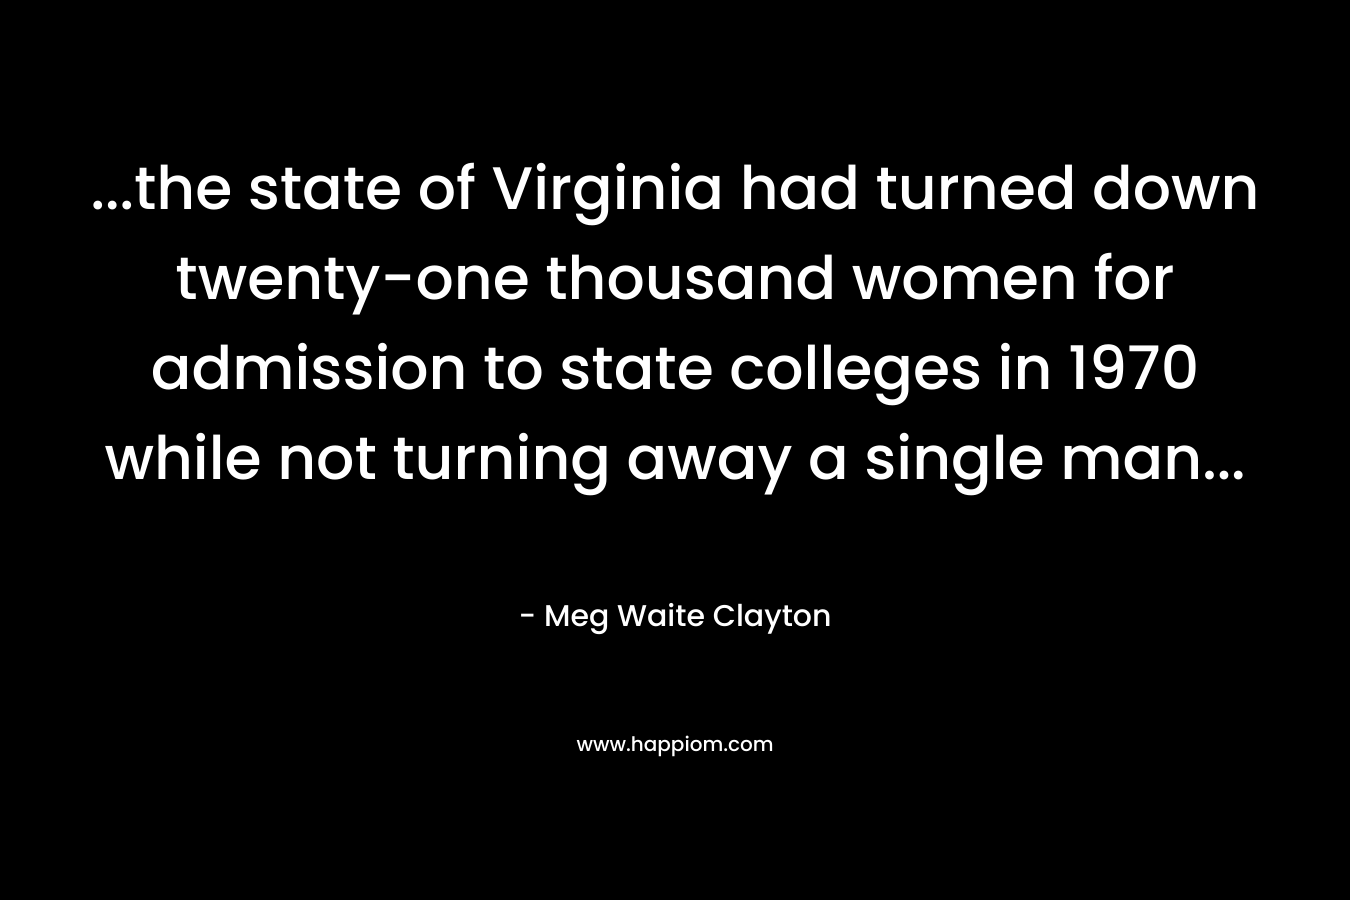 ...the state of Virginia had turned down twenty-one thousand women for admission to state colleges in 1970 while not turning away a single man...